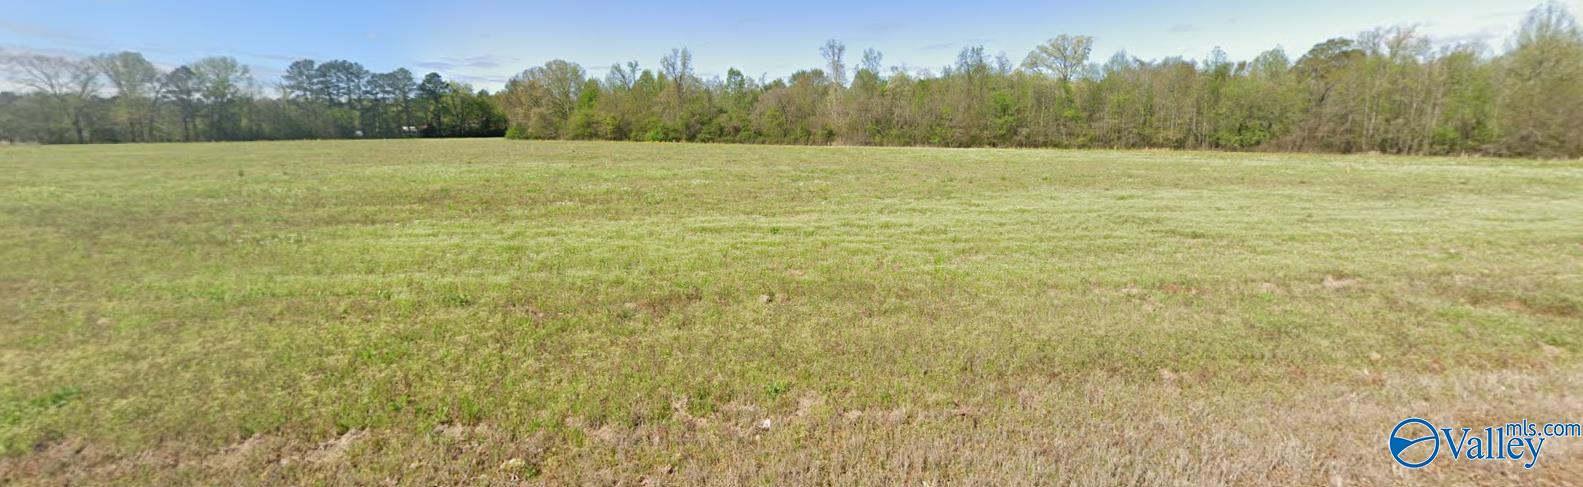 Property: Tract 13 Edgewood Road,Athens, AL